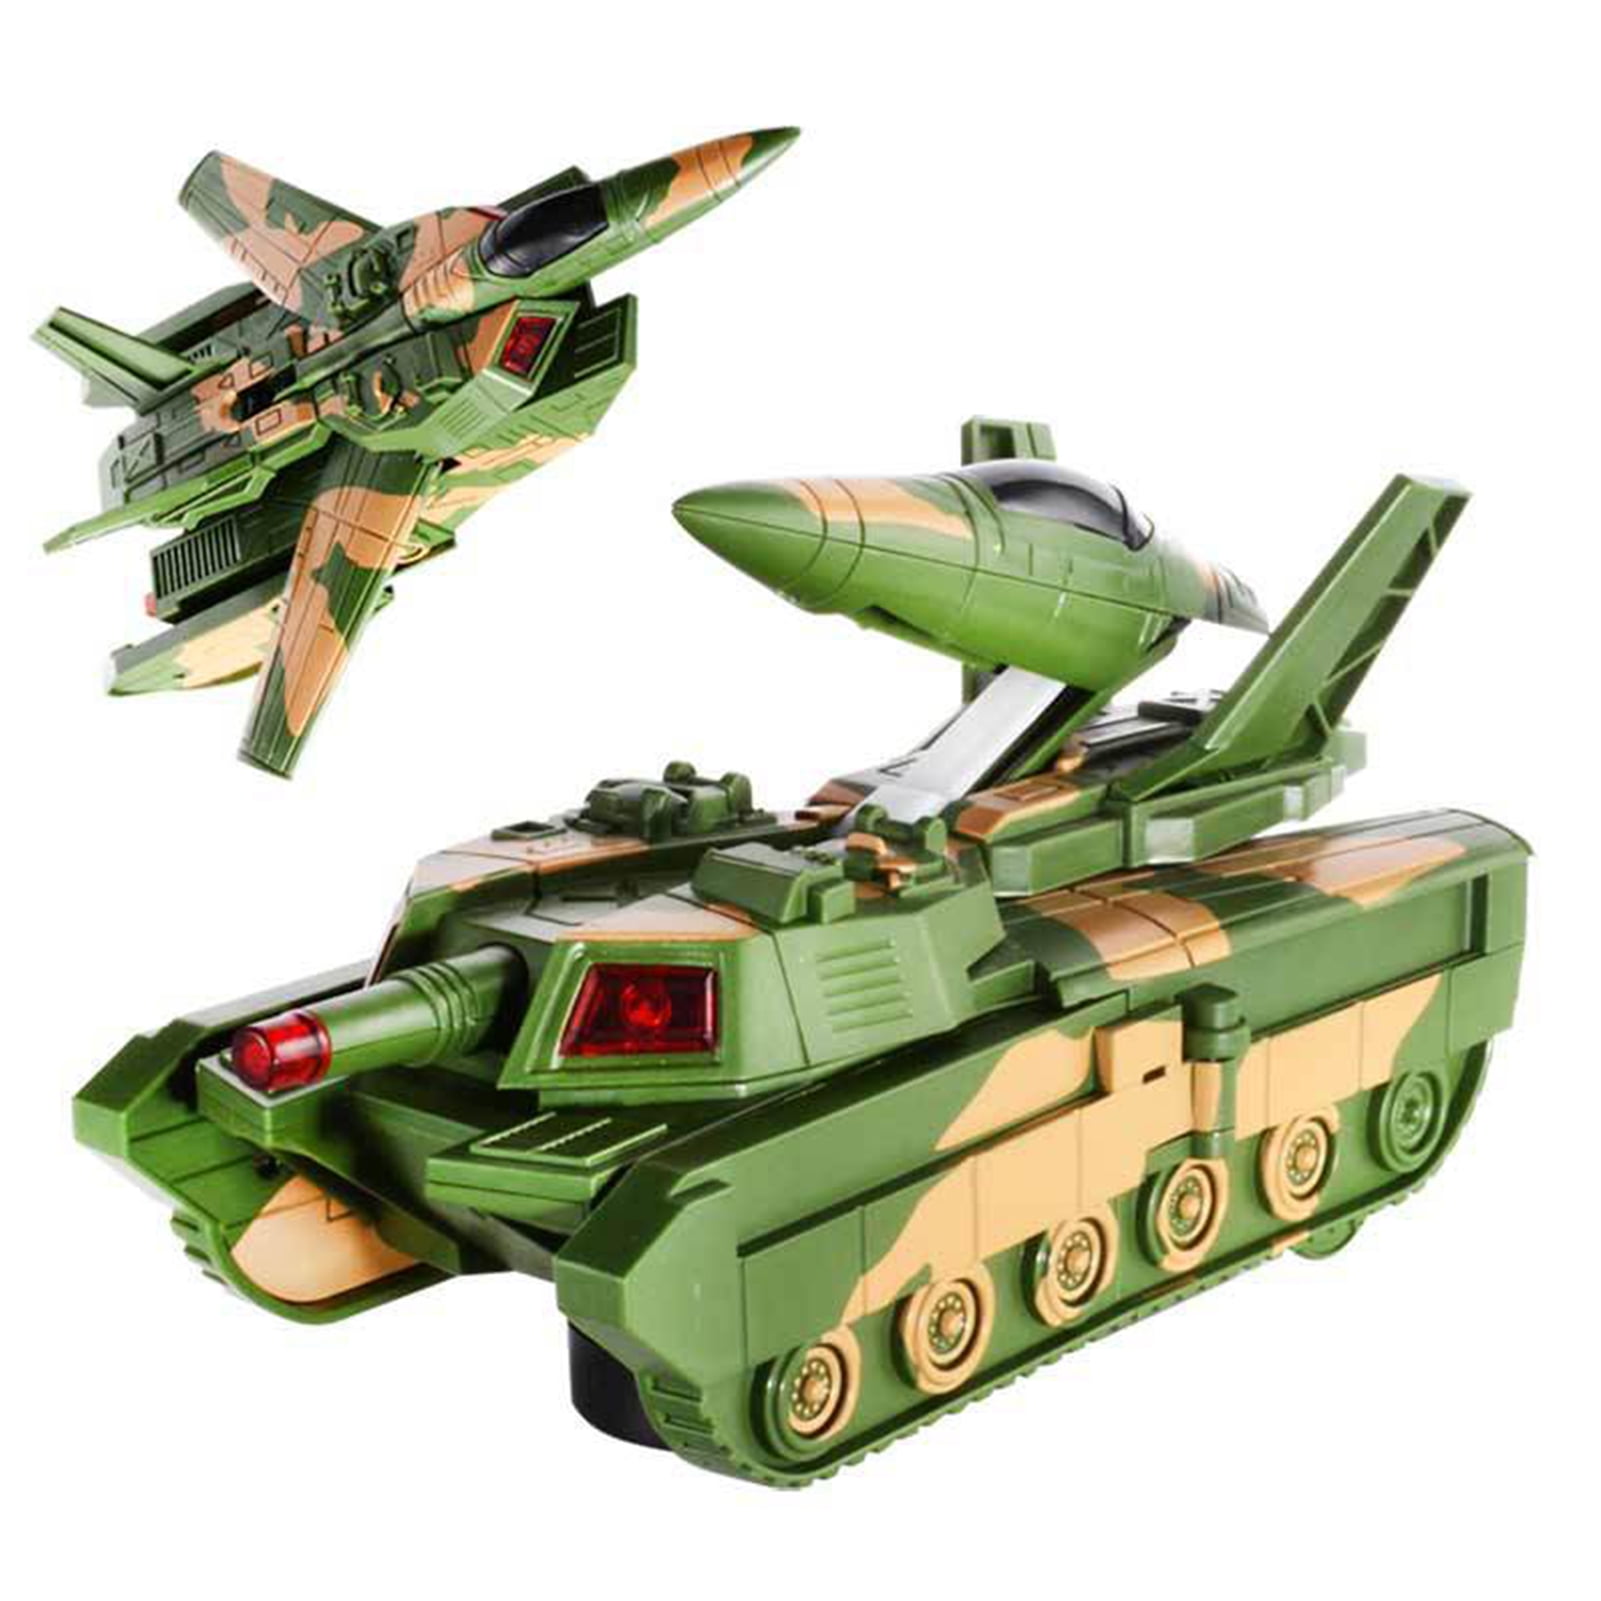 Vokodo Toy Military Fighter Truck Friction Power With Lights And Sounds TE-70 